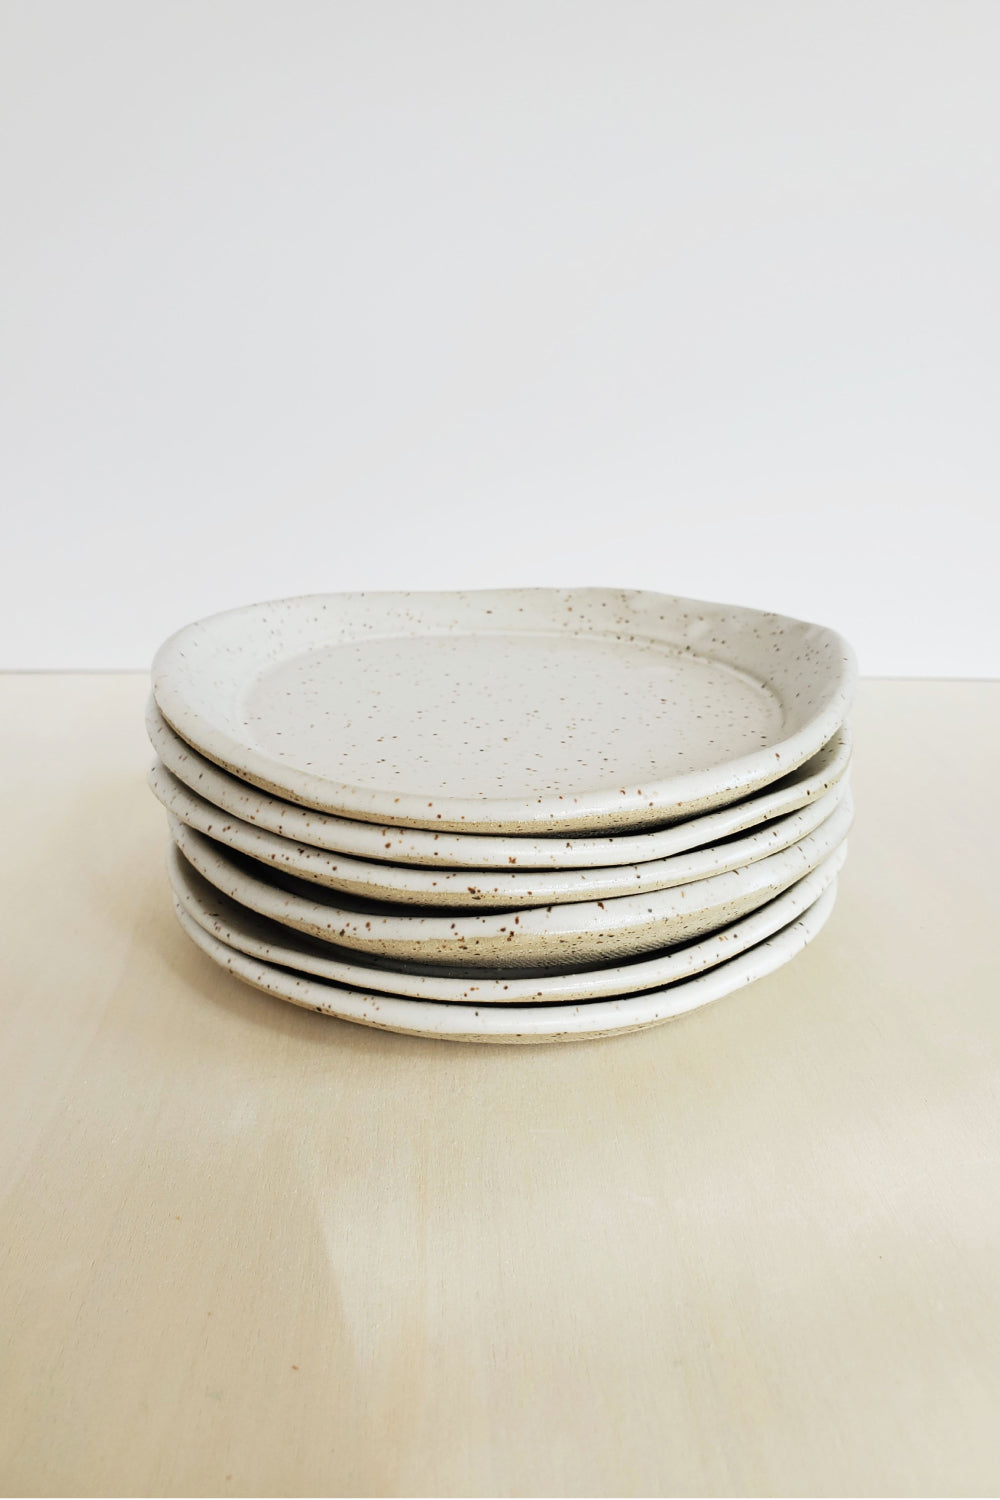 Drip Plate/ Snack Plate - Speckled